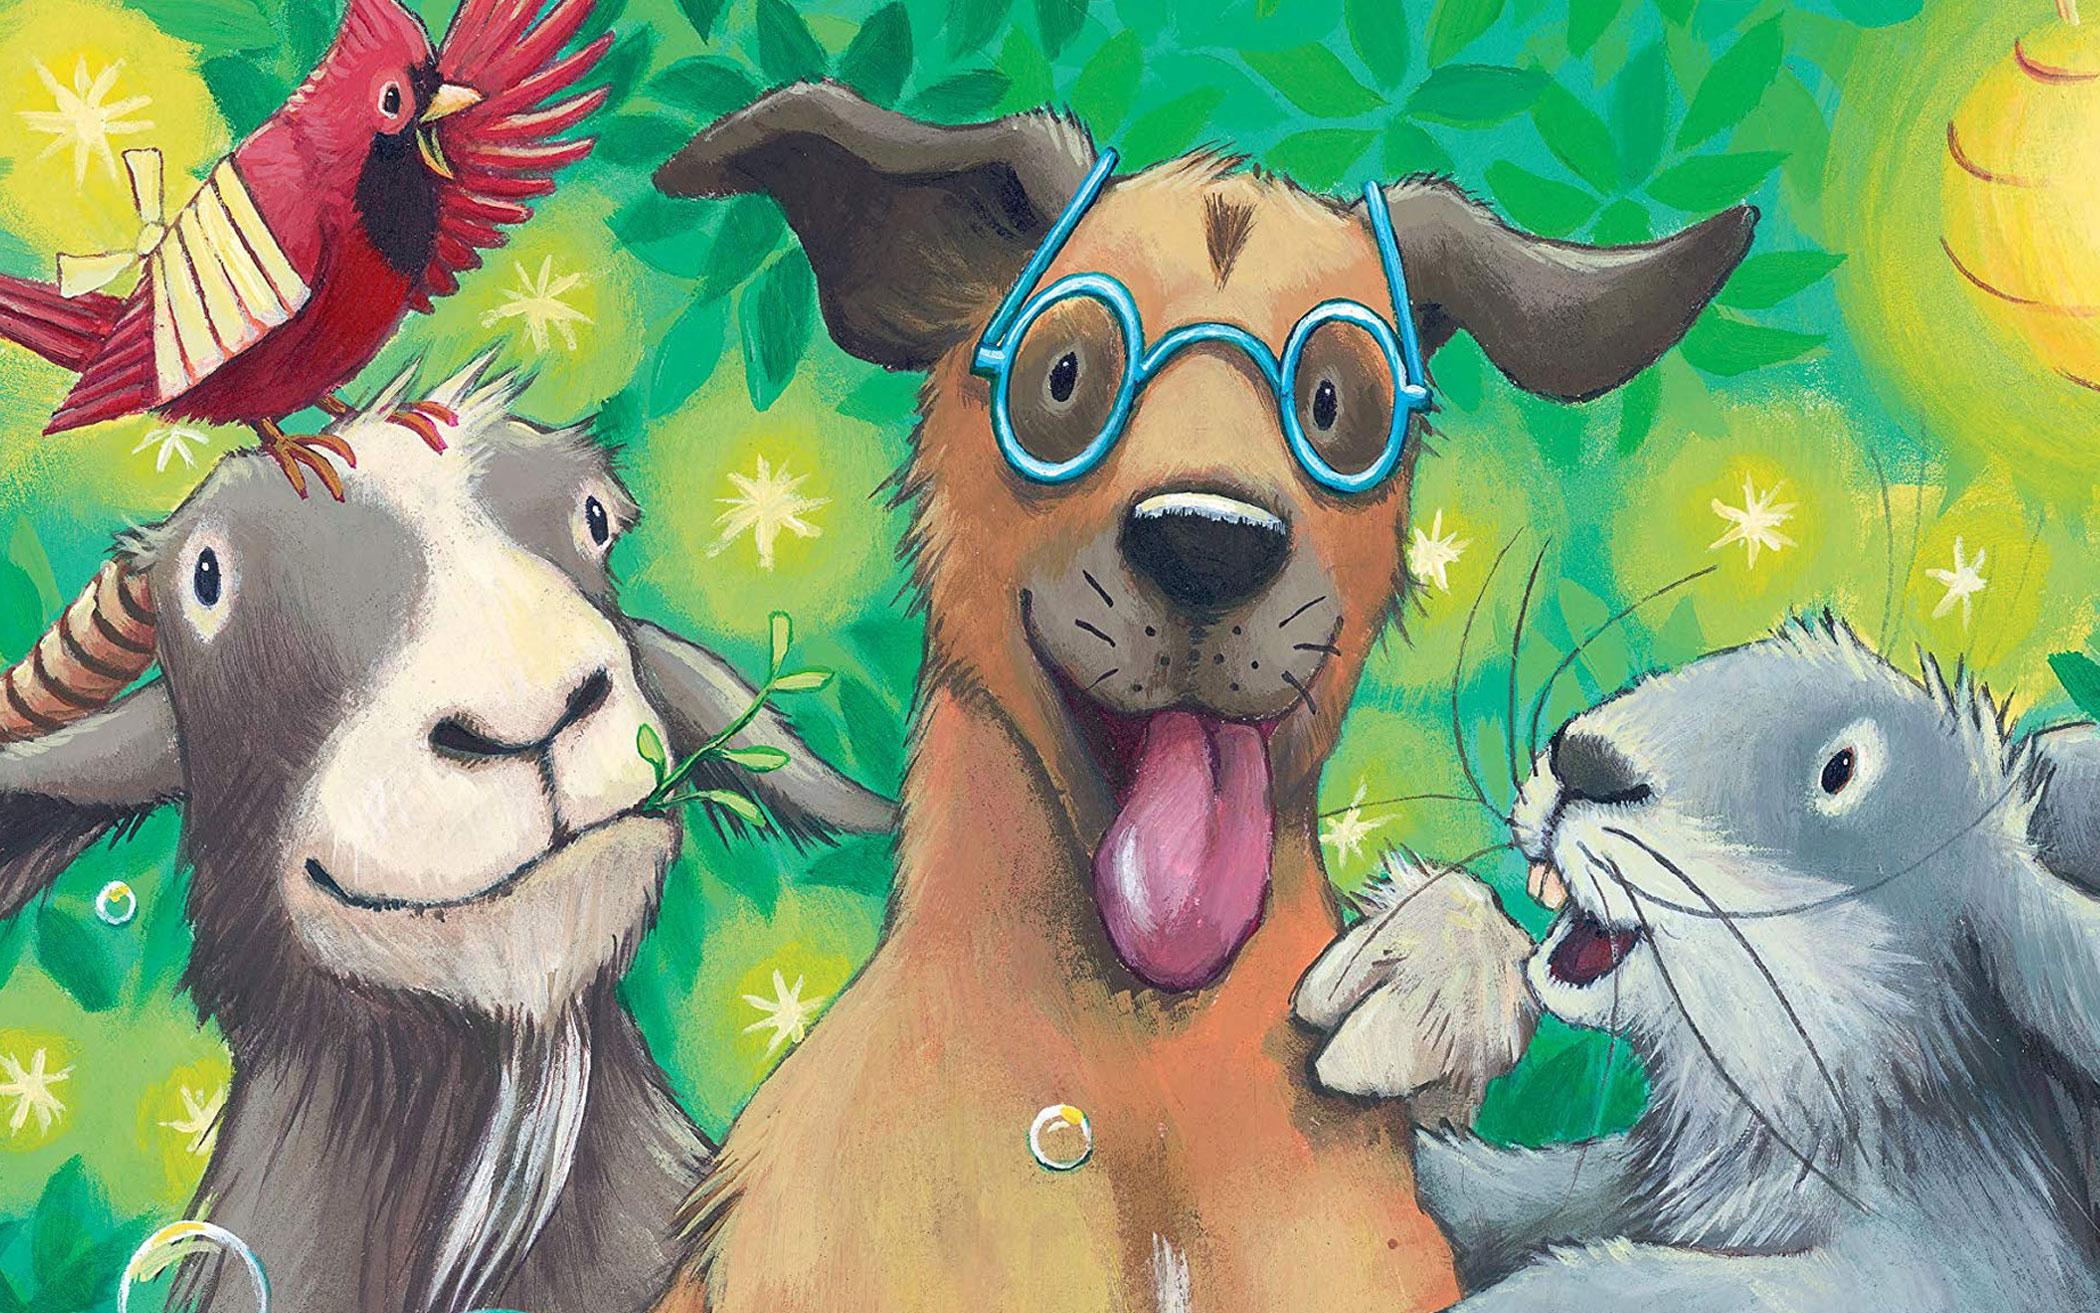 From Chewable Books to Books on Which to Chew: Tomes for Younger Readers 